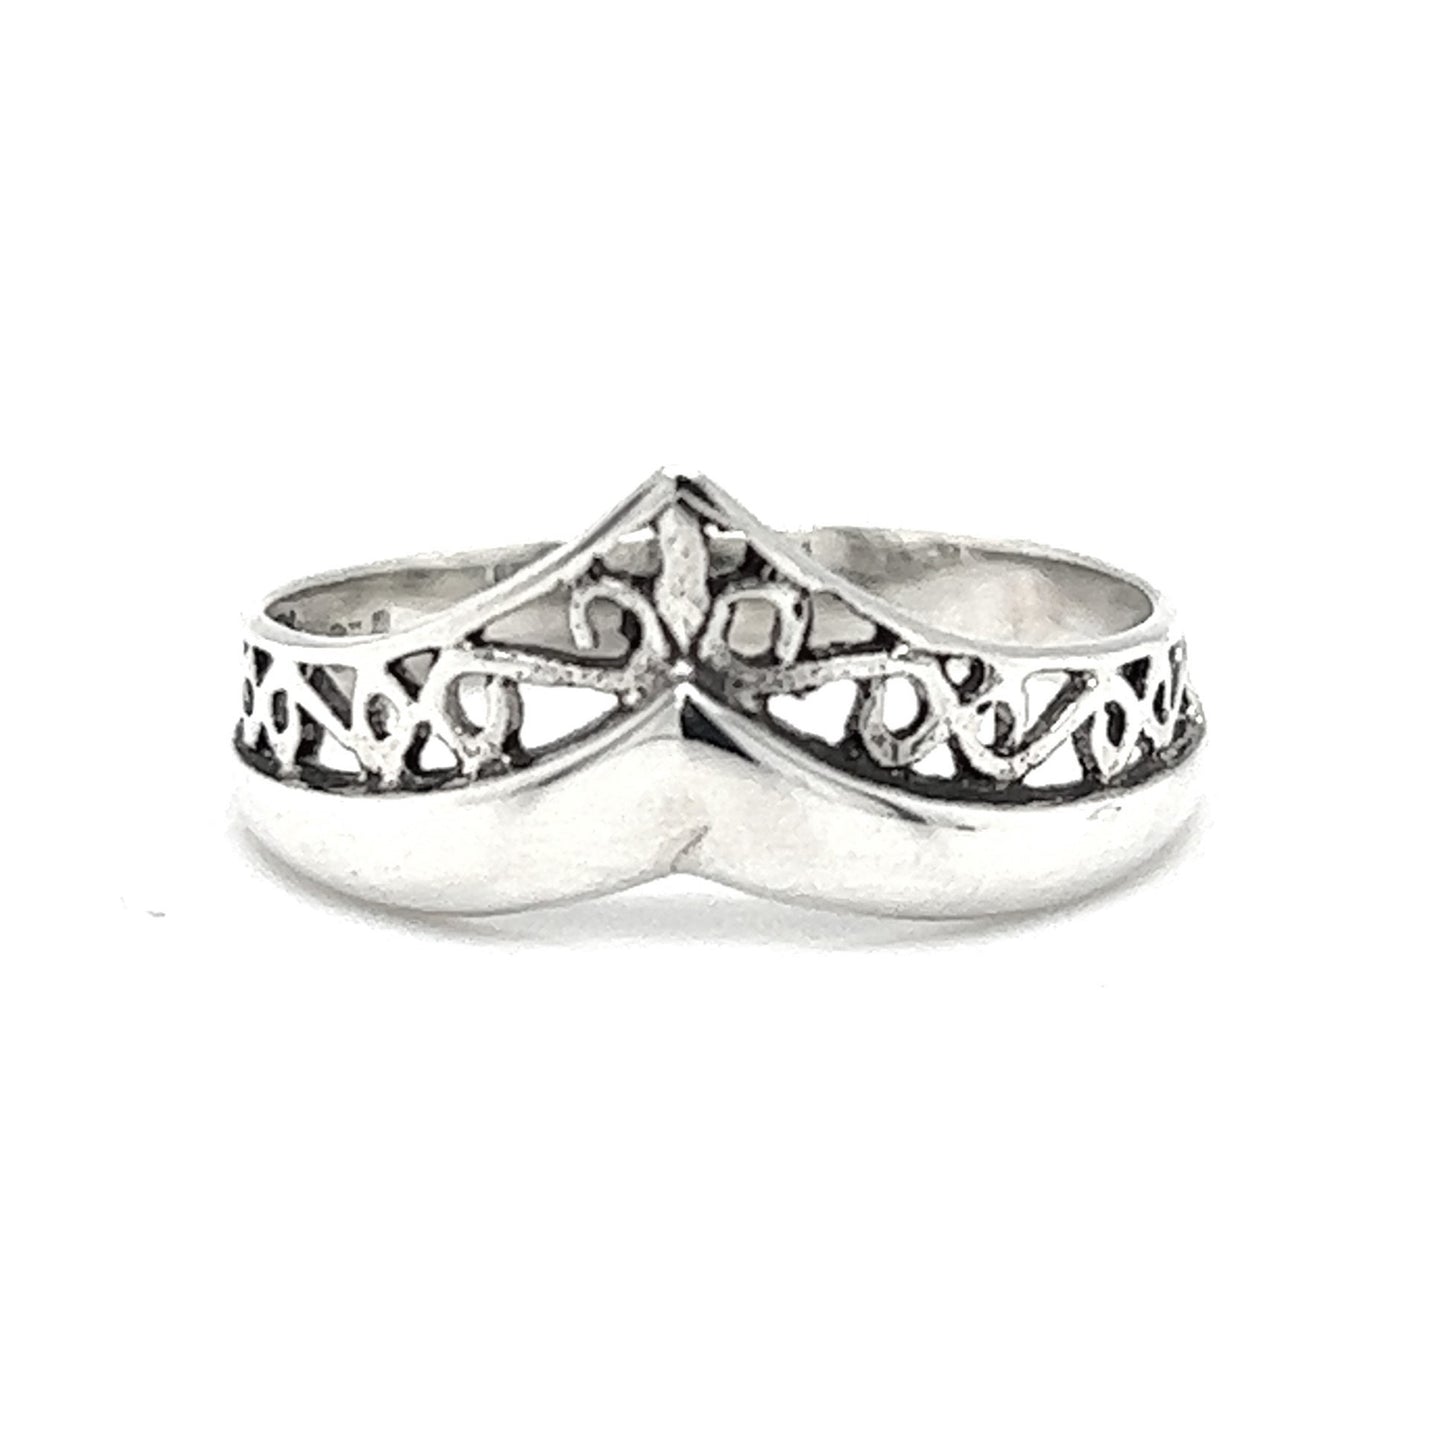 A chic Filigree Chevron Ring with a delicate and ornate design, exuding a touch of Victorian charm.